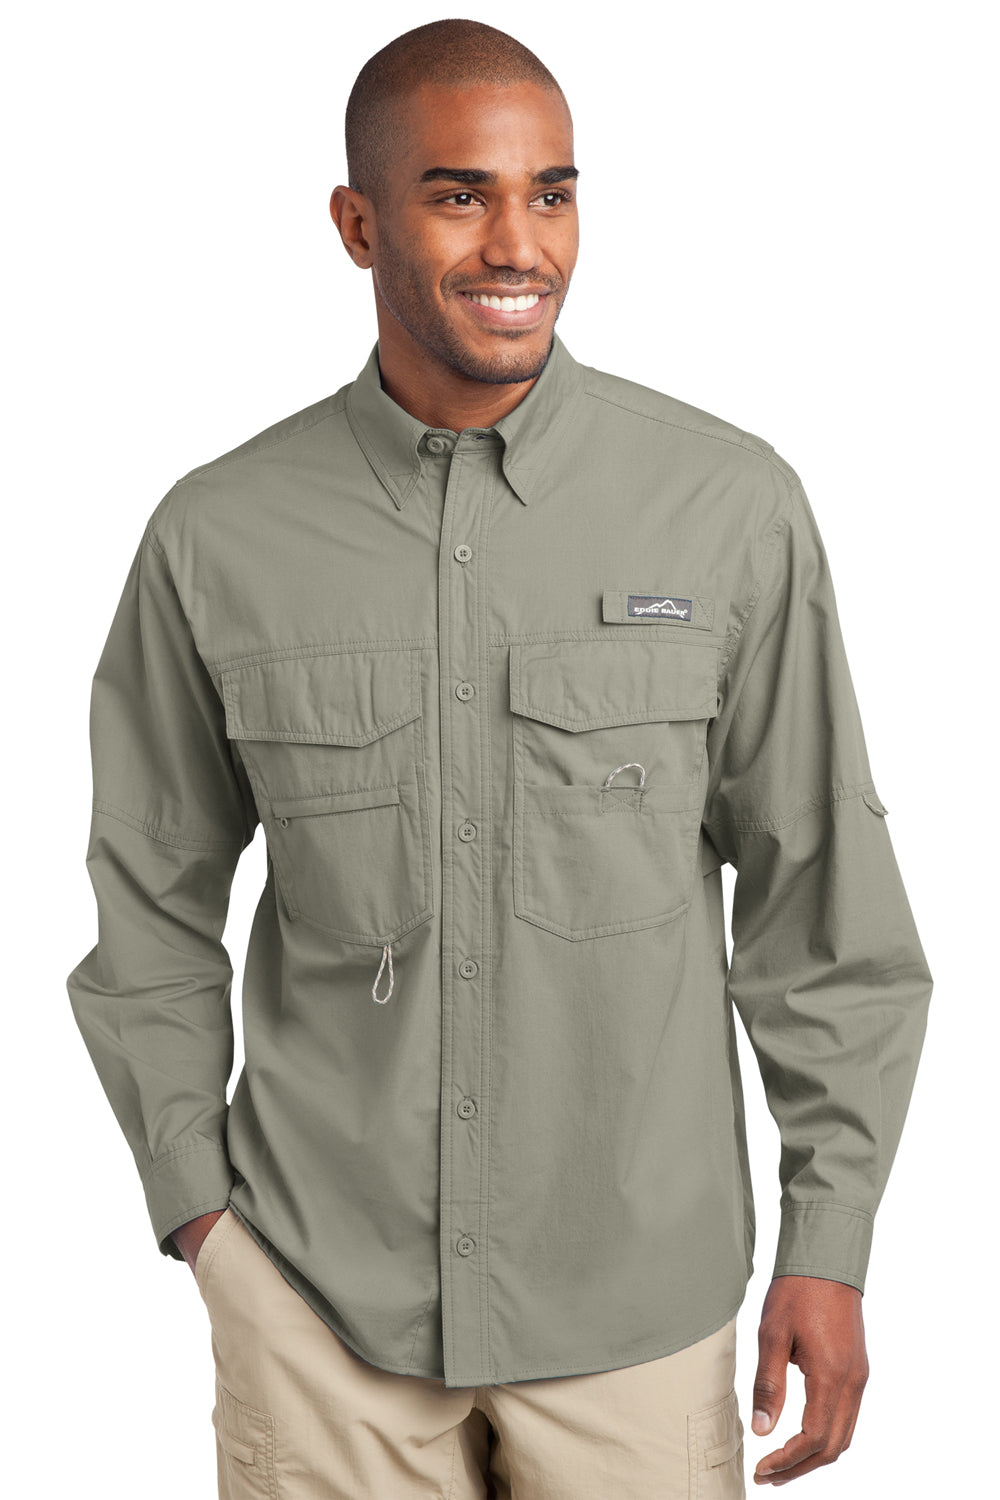 Eddie Bauer EB606 Mens Fishing Long Sleeve Button Down Shirt w/ Double Pockets Driftwood Front